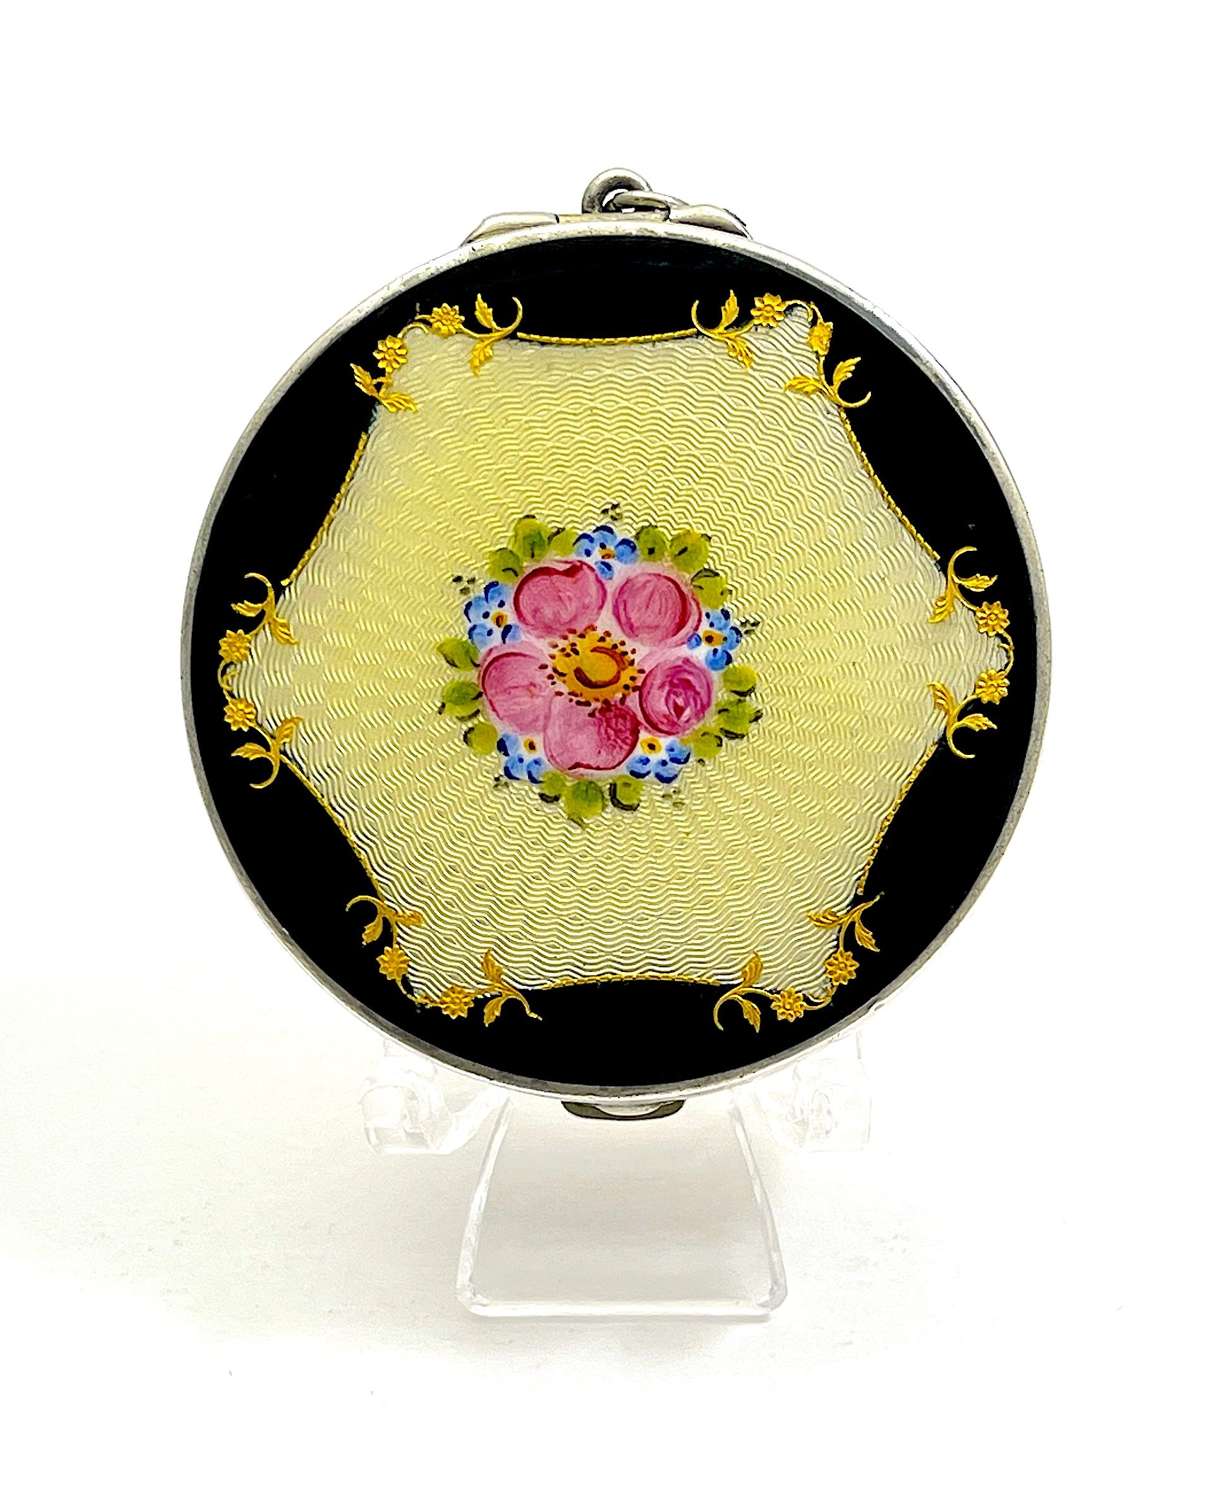 Antique Tiffany Style Sterling Silver and Enamel Compact.